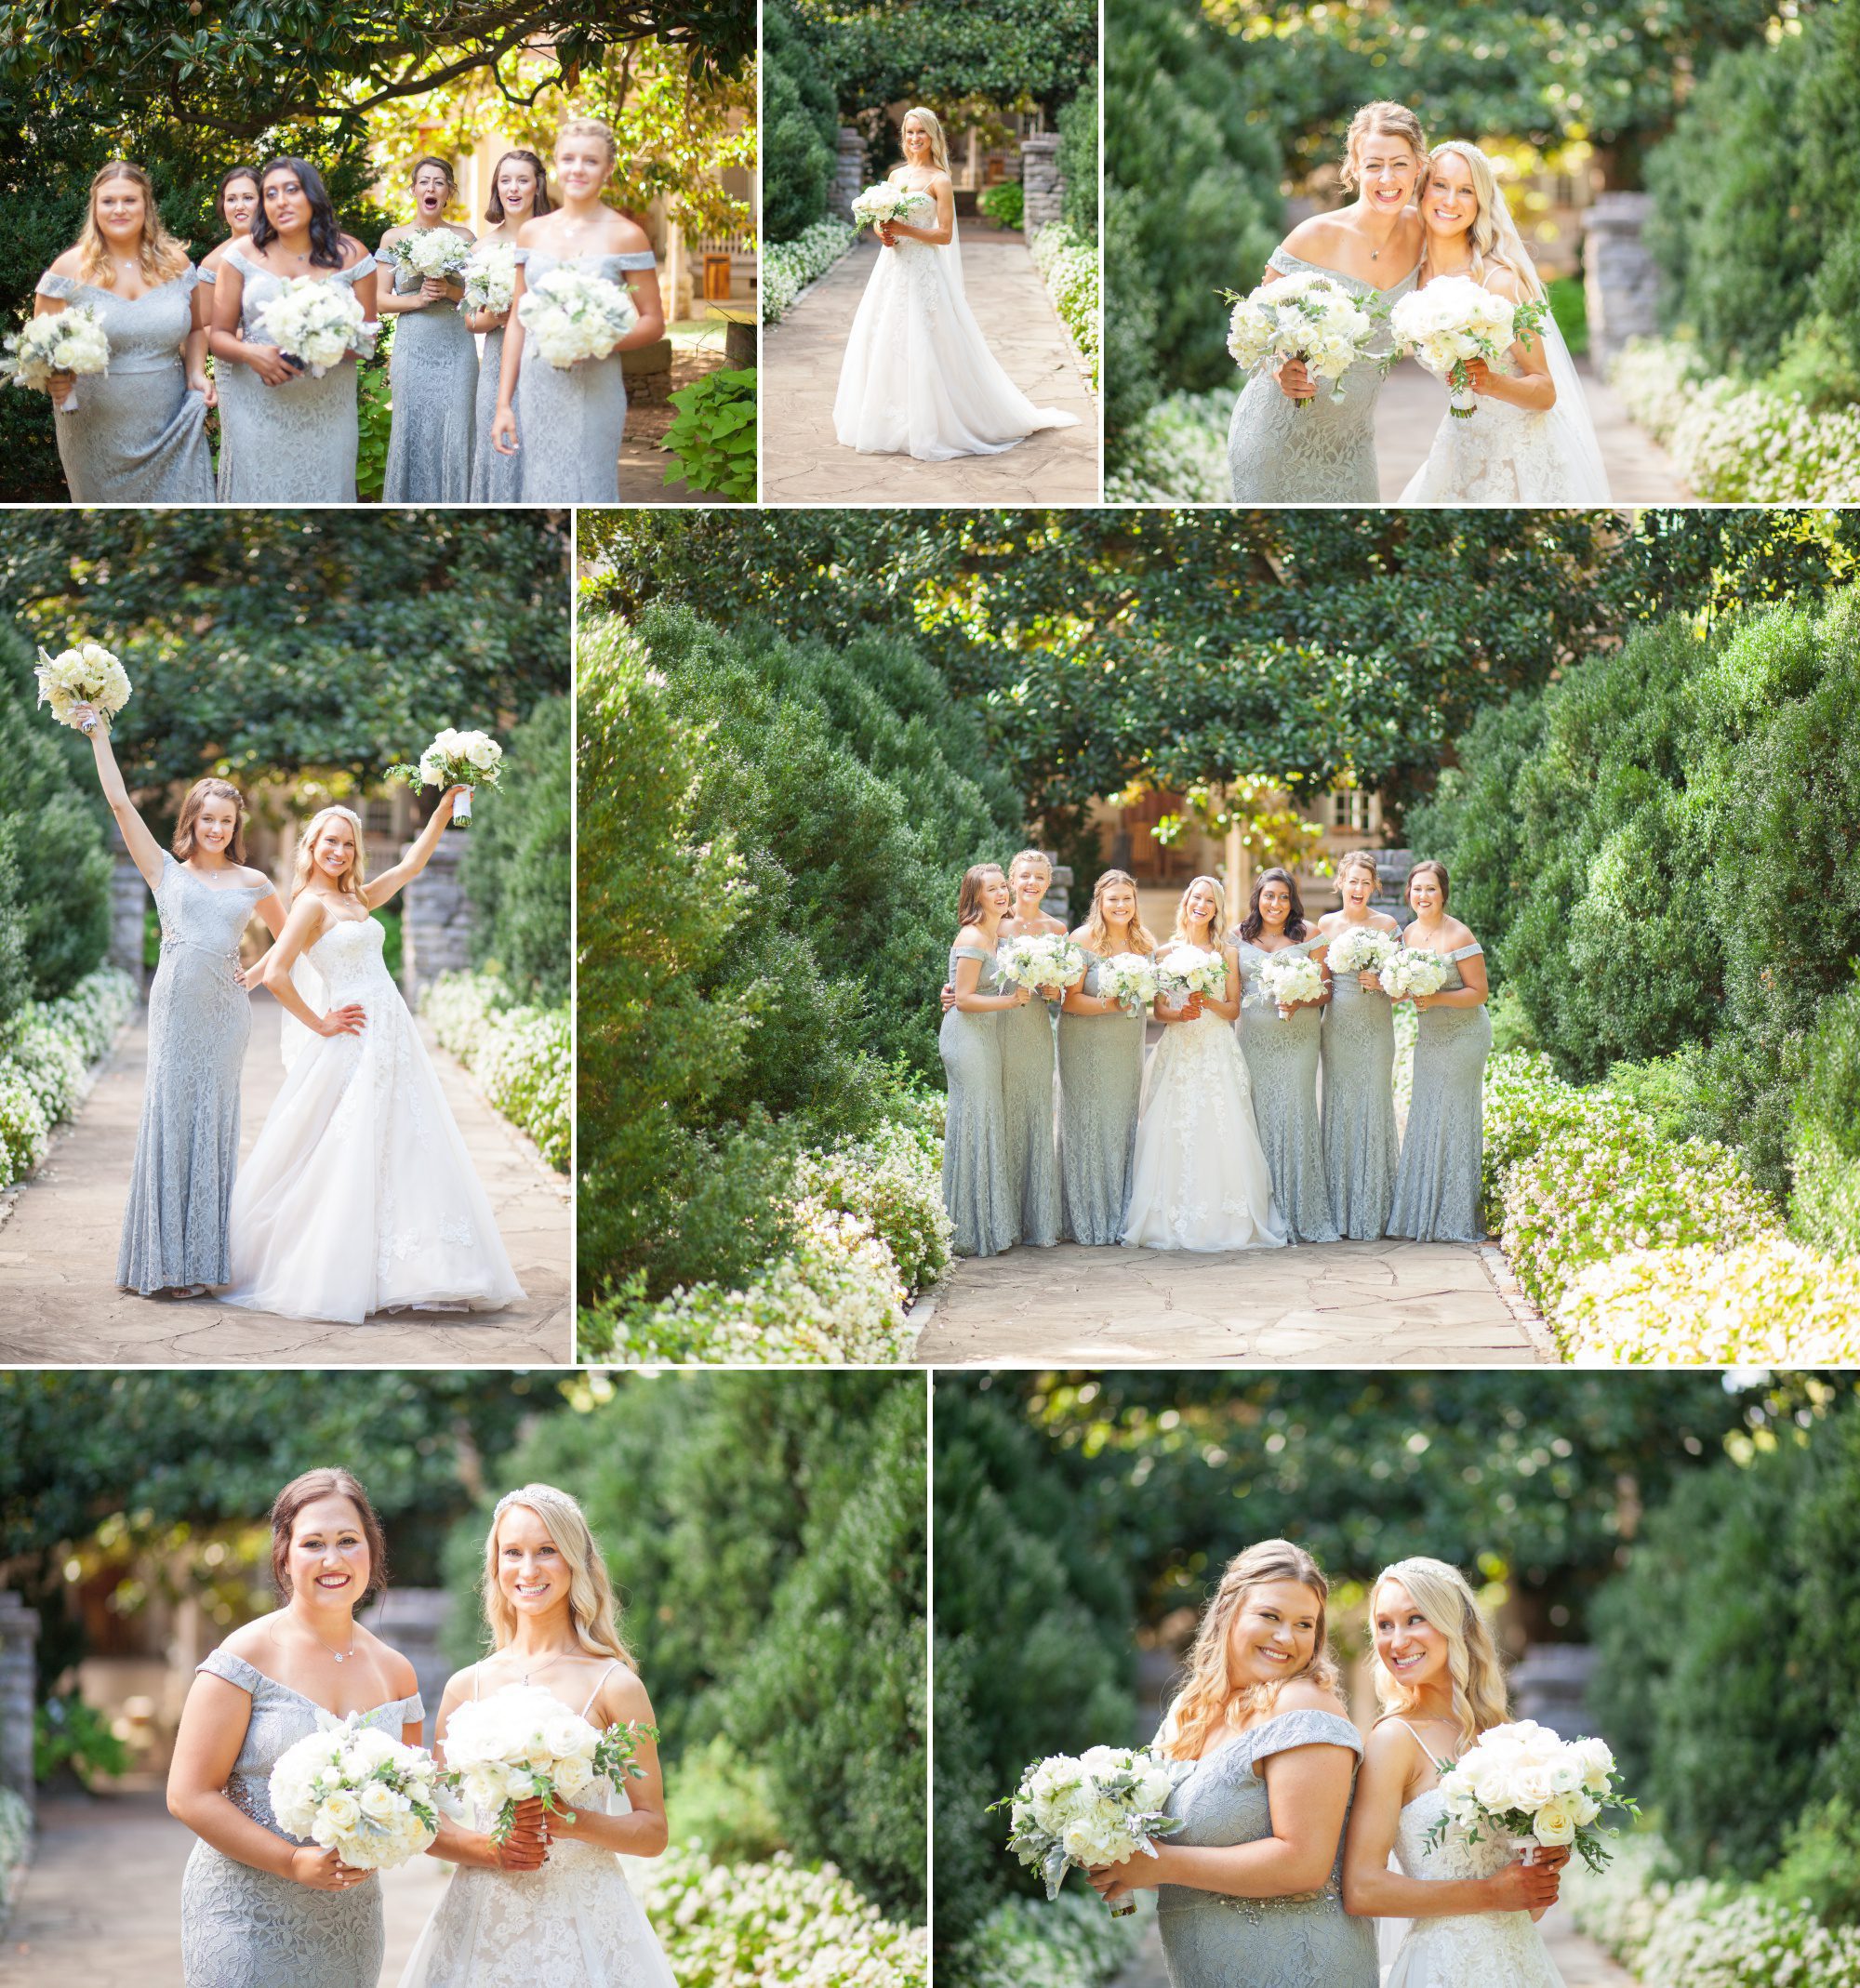 The cutest bridesmaids in grey gowns with bride pose for portraits before wedding ceremony and reception at Belle Meade Plantation in Nashville, TN. Photos by Krista Lee Photography 